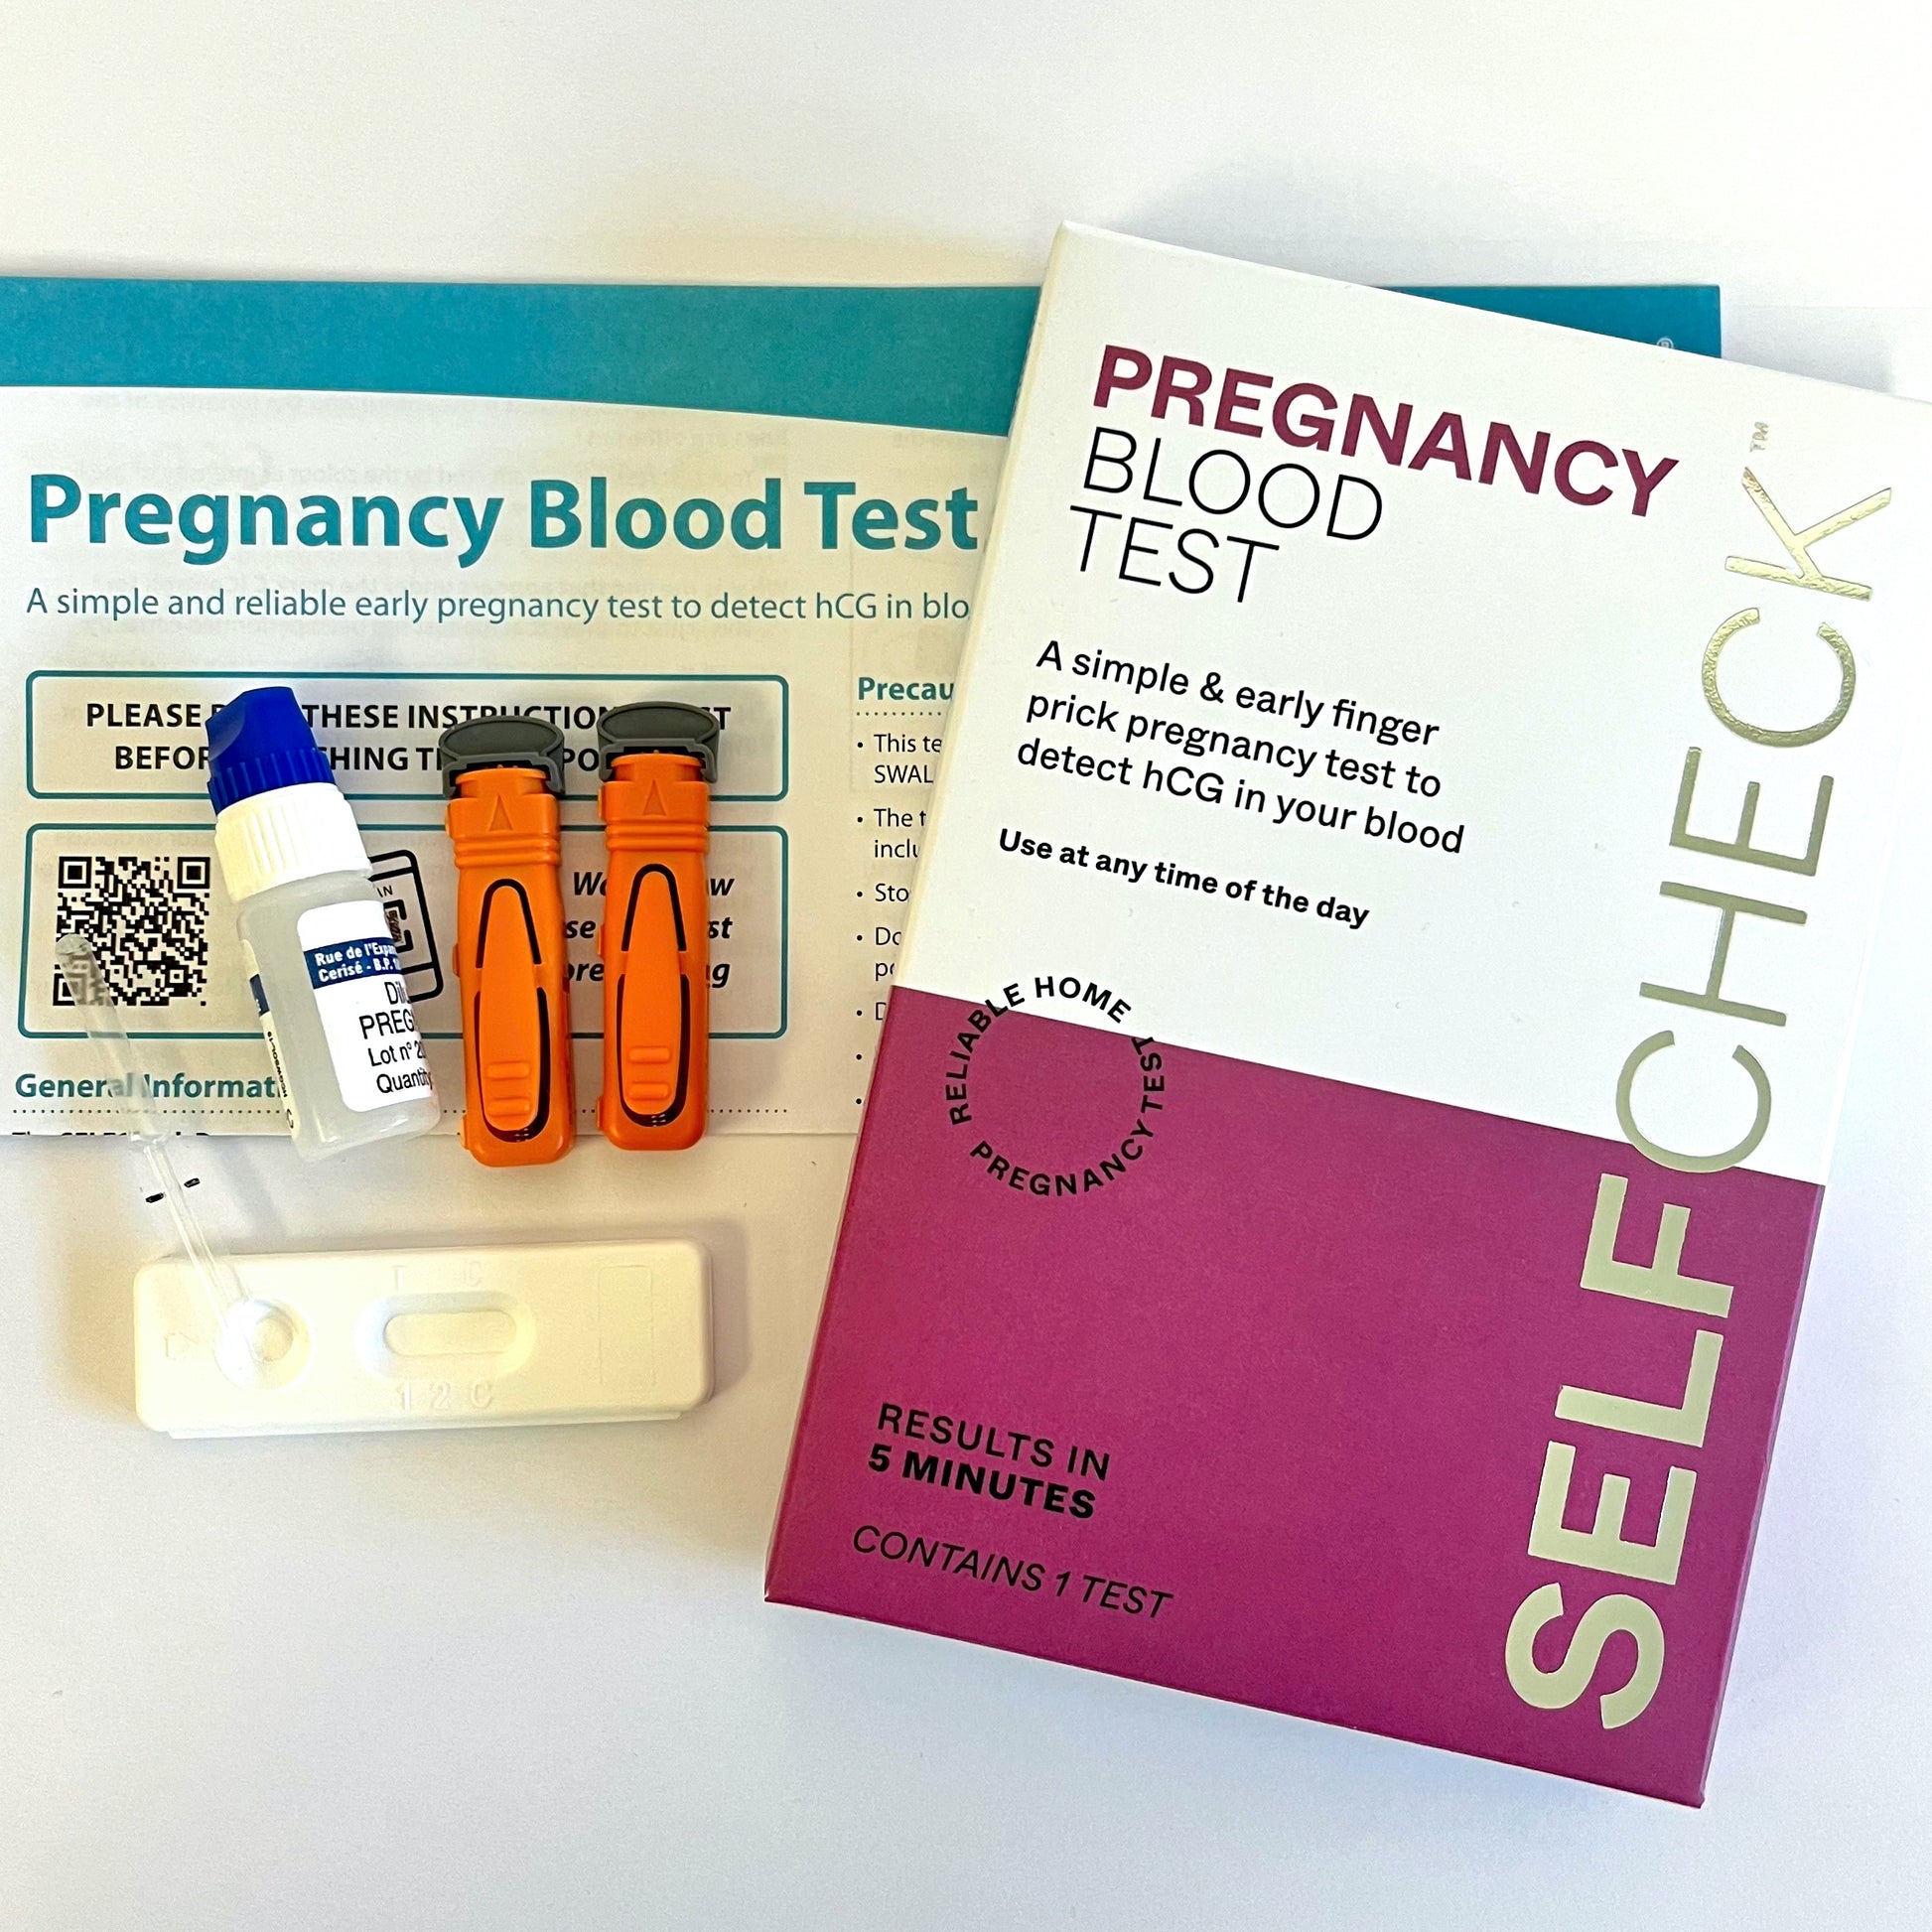 SELFCHECK Pregnancy Blood Test showing components